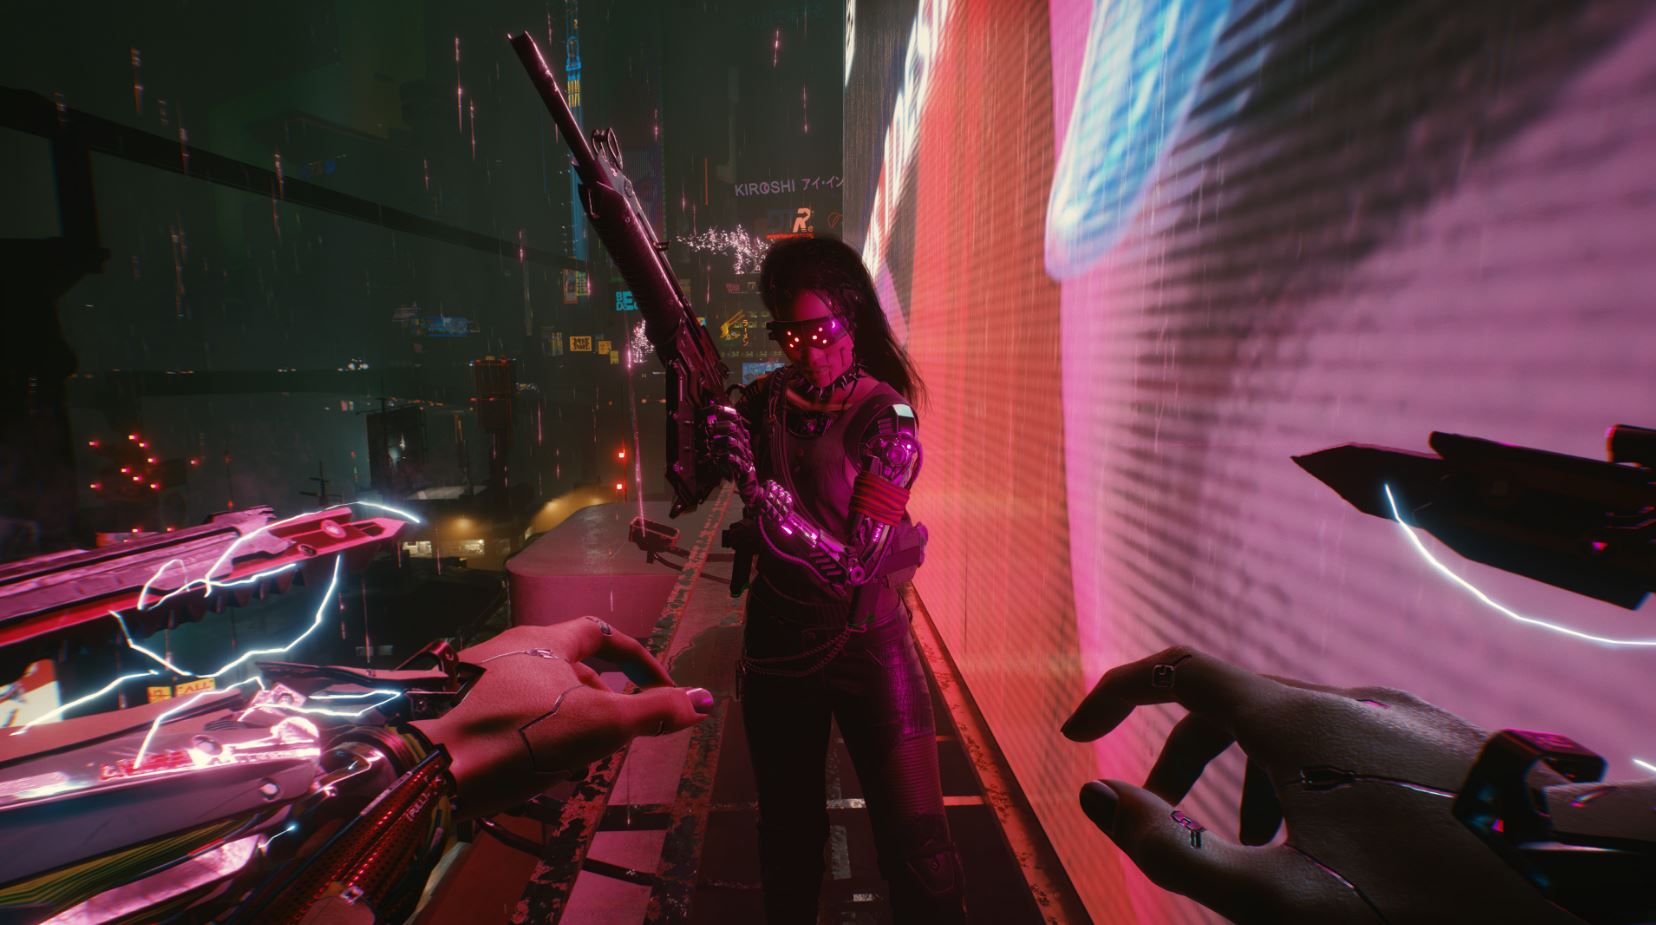 Cyberpunk 2077 Refund How To Get Your Money Back On Ps4 Xbox One And Pc Slashgear Trading trust for additional time is one of the hardest decisions a developer can make.. slashgear